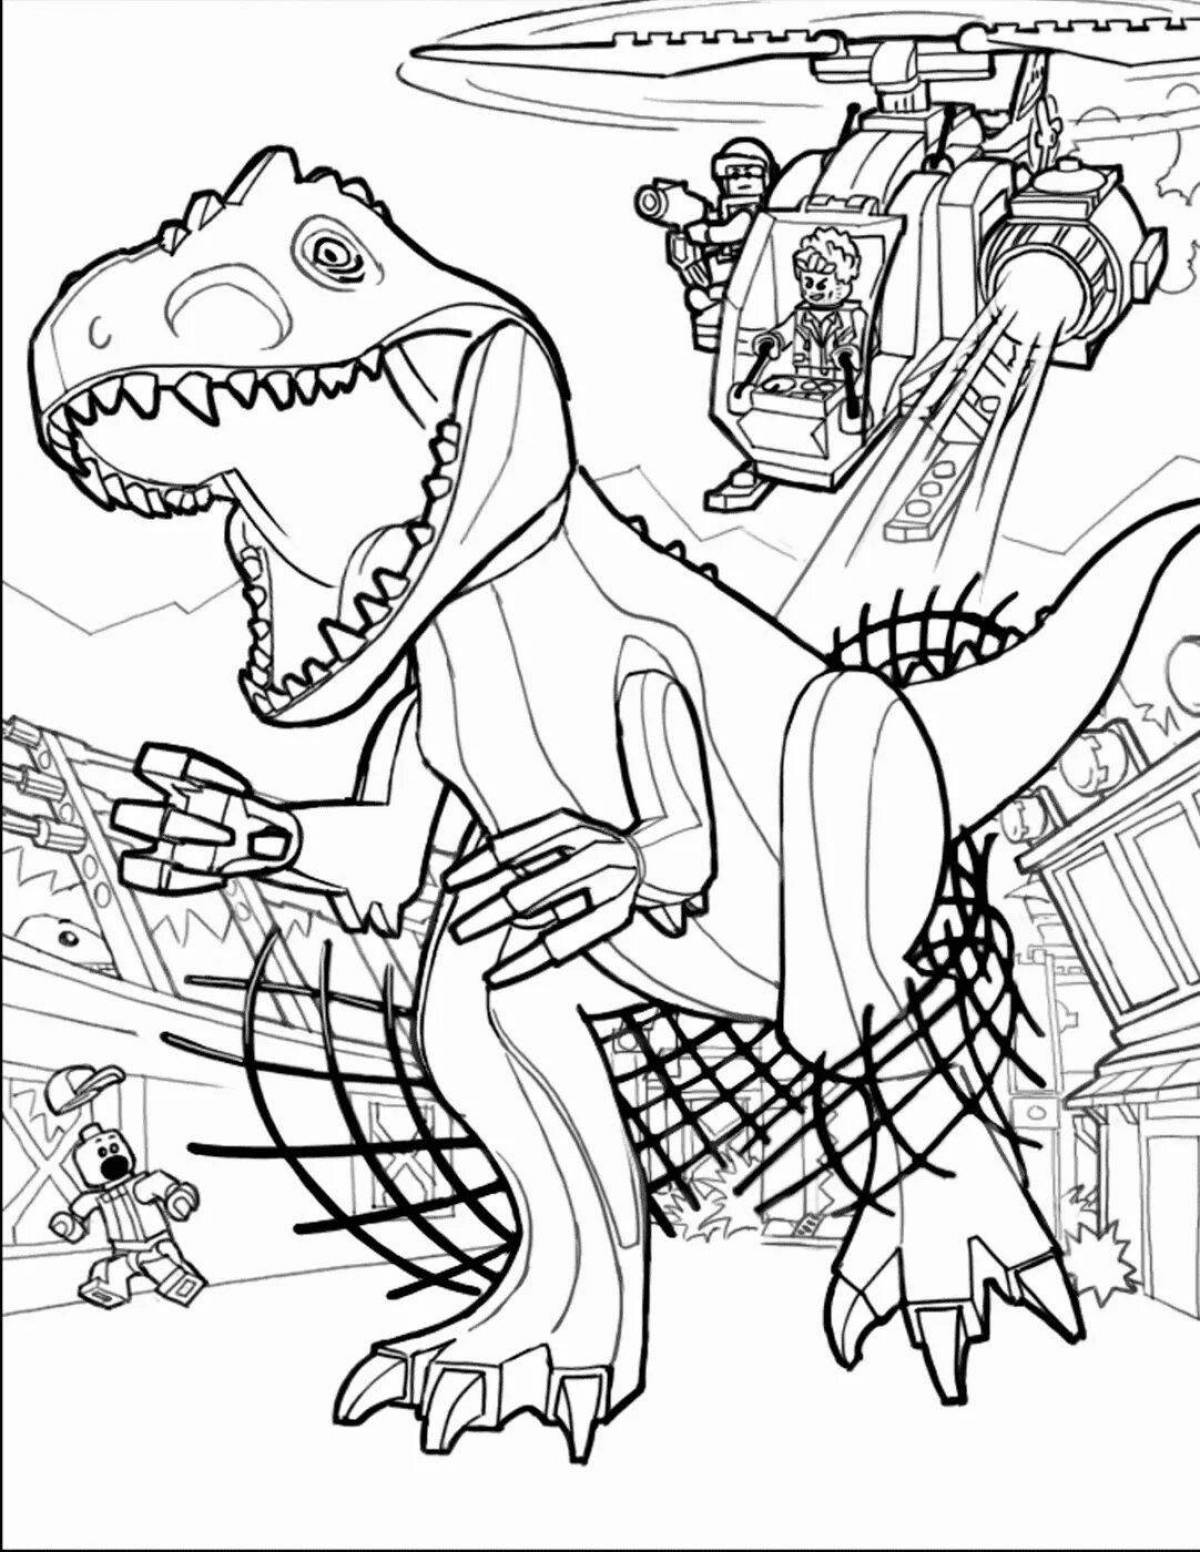 Awesome Jurassic park dinosaur coloring pages